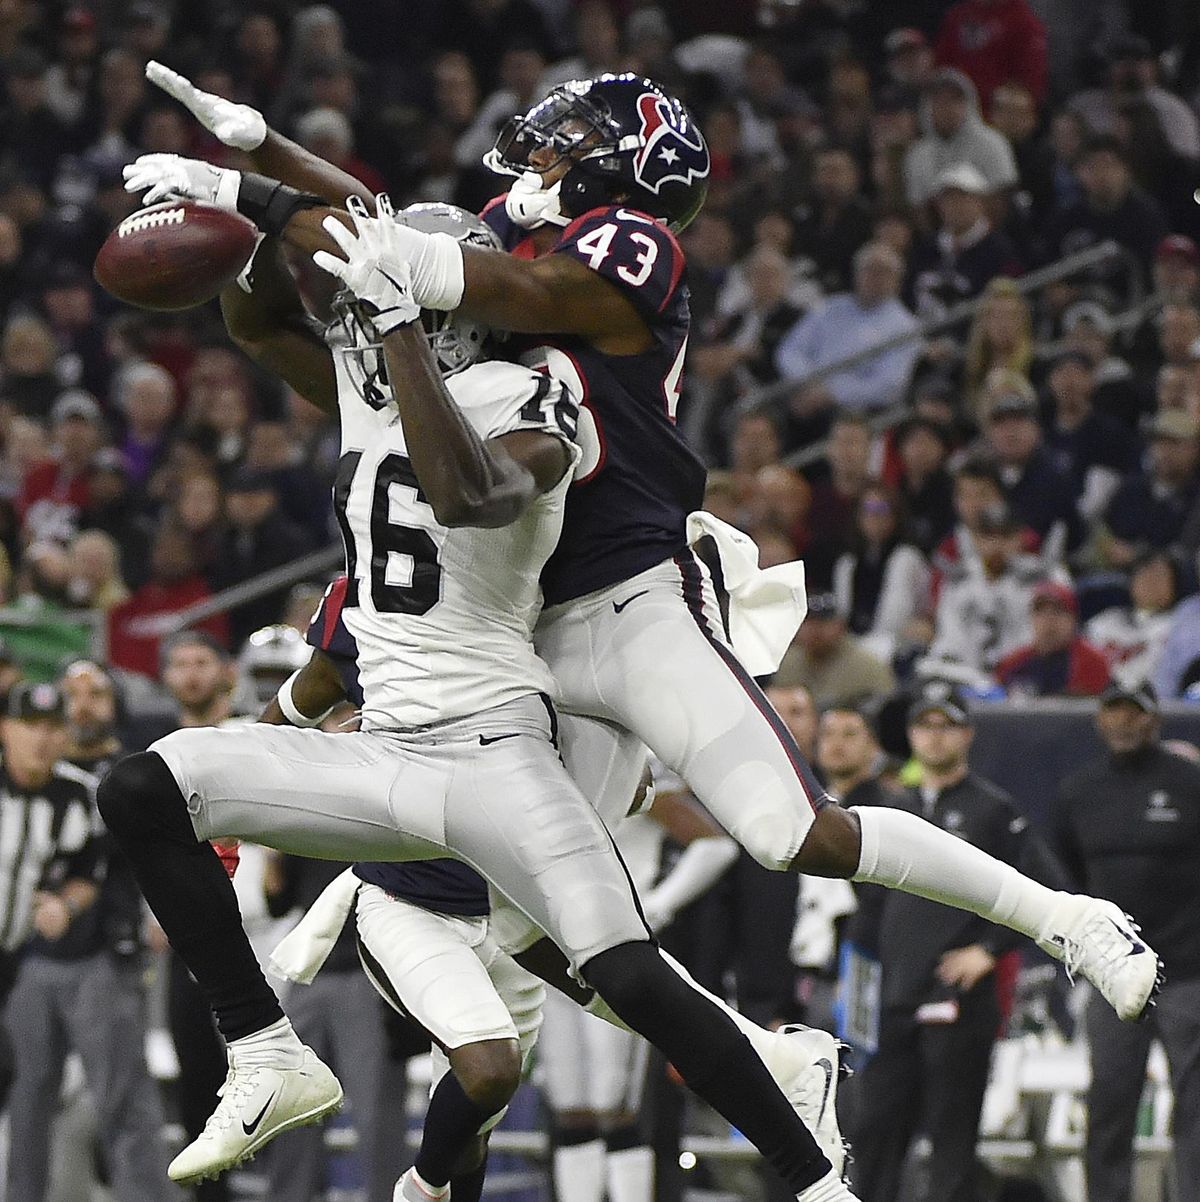 Houston Texans strong safety Corey Moore (43) breaks up a pass intended for Oakland Raiders wide receiver Johnny Holton (16) during the second half of an AFC Wild Card NFL game Saturday, Jan. 7, 2017, in Houston. The Houston Texans won 27-14. (Eric Christian Smith / Associated Press)